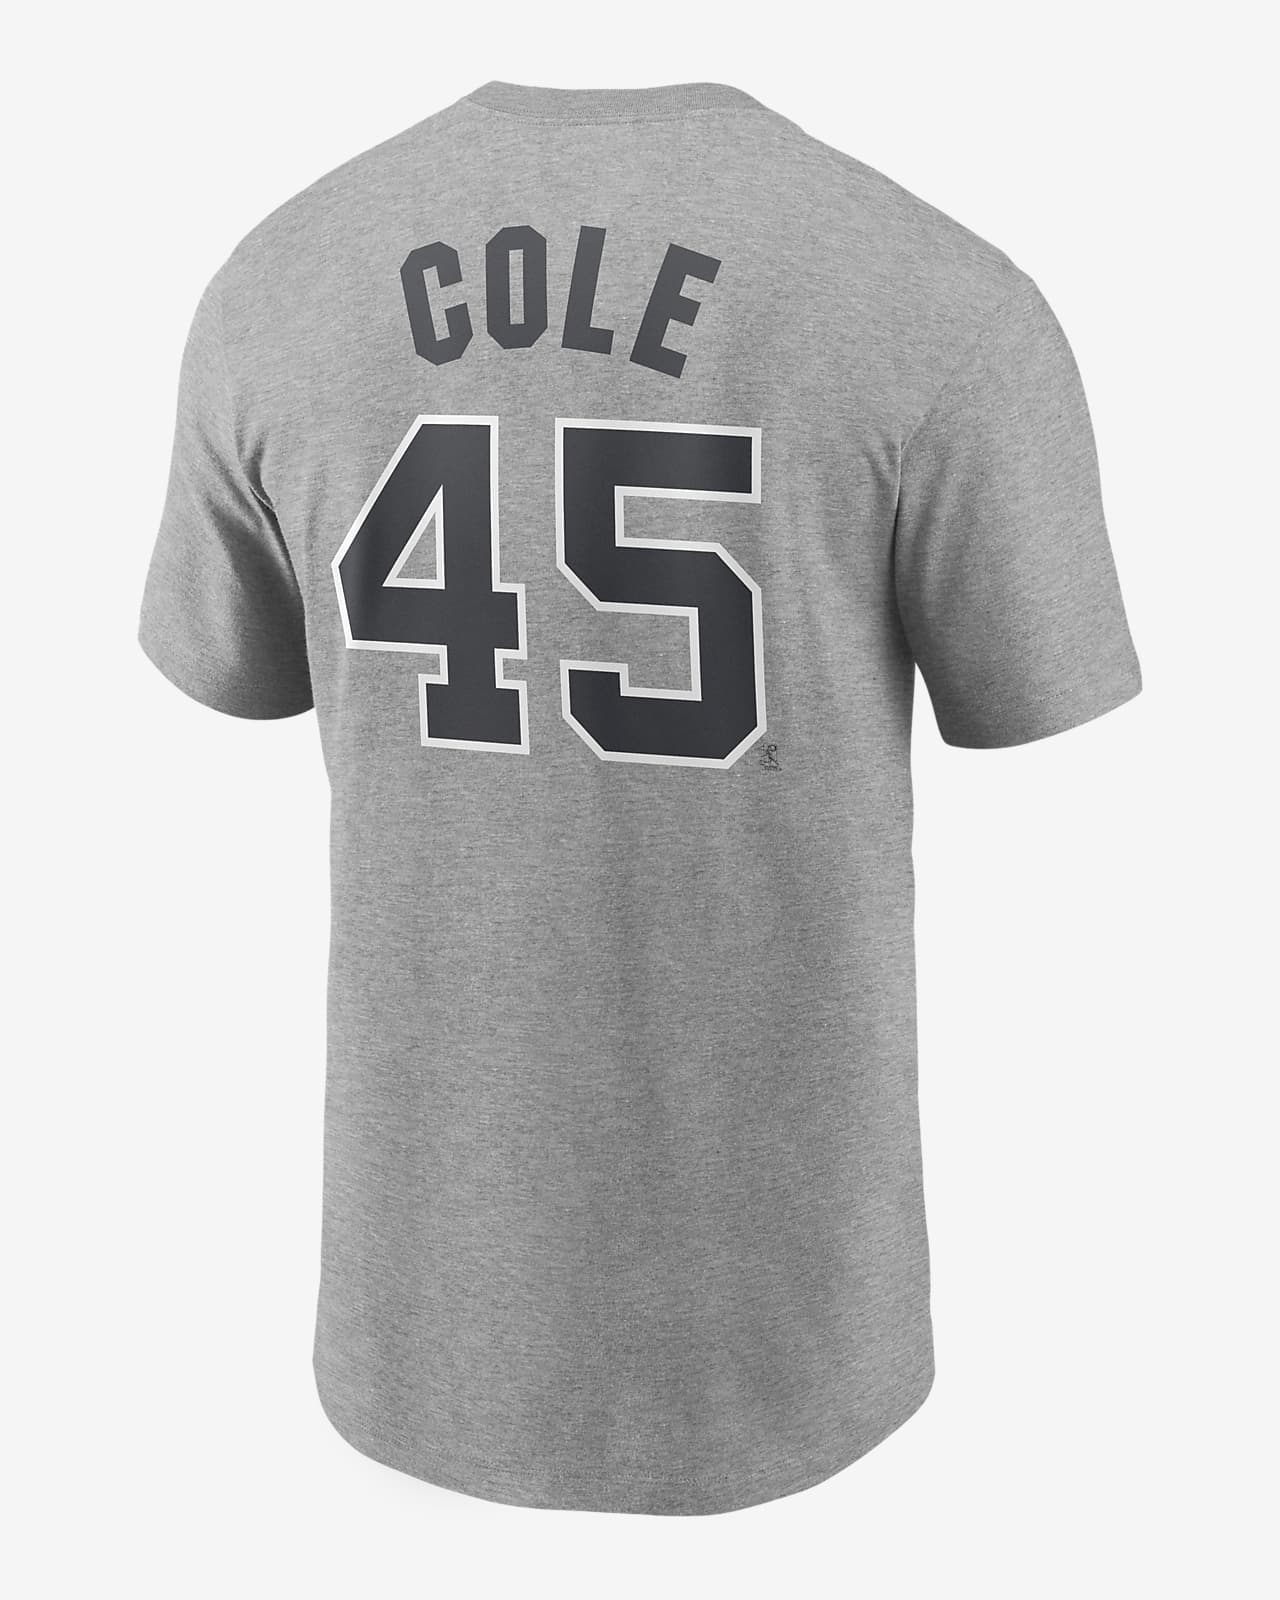 Men's New York Yankees Gerrit Cole Nike White Home Authentic Player Jersey